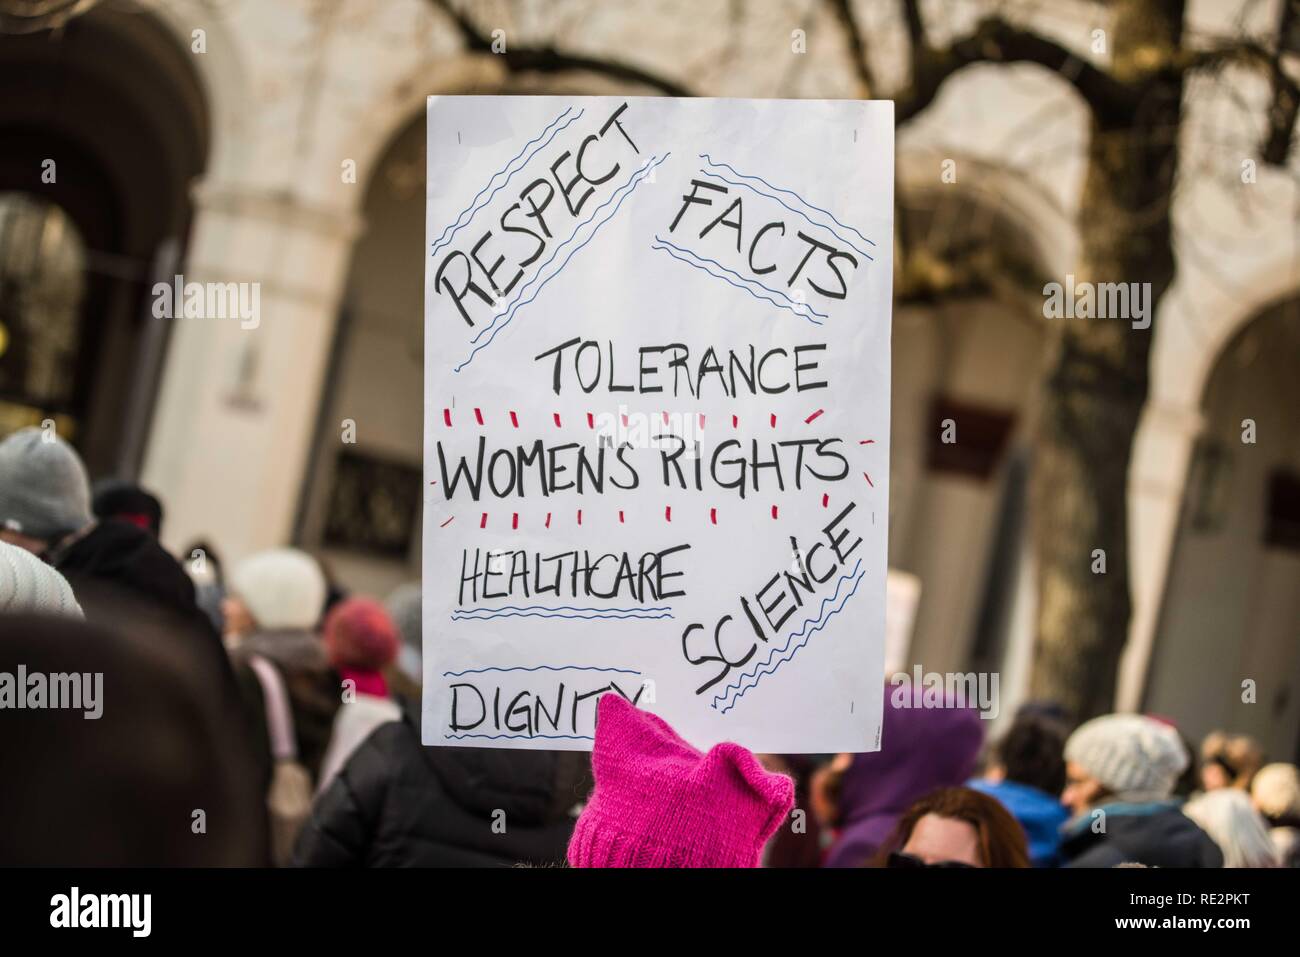 Munich, Bavaria, Germany. 19th Jan, 2019. A sign with text around tolerance, women's rights, healthcare, science, and facts held at the 2019 Women's March in Munich, Germany. Two years after the original Women's March, over 250 marched through the streets of Munich to raise awareness of the issues women face in modern western societies. Organized by the ex-pat group Democrats Abroad, the demonstrators sought to show solidarity with marches in some thirty countries around the world, as well as highlight ongoing struggles for women, immigrants, and other groups under threat in the United Credit: Stock Photo